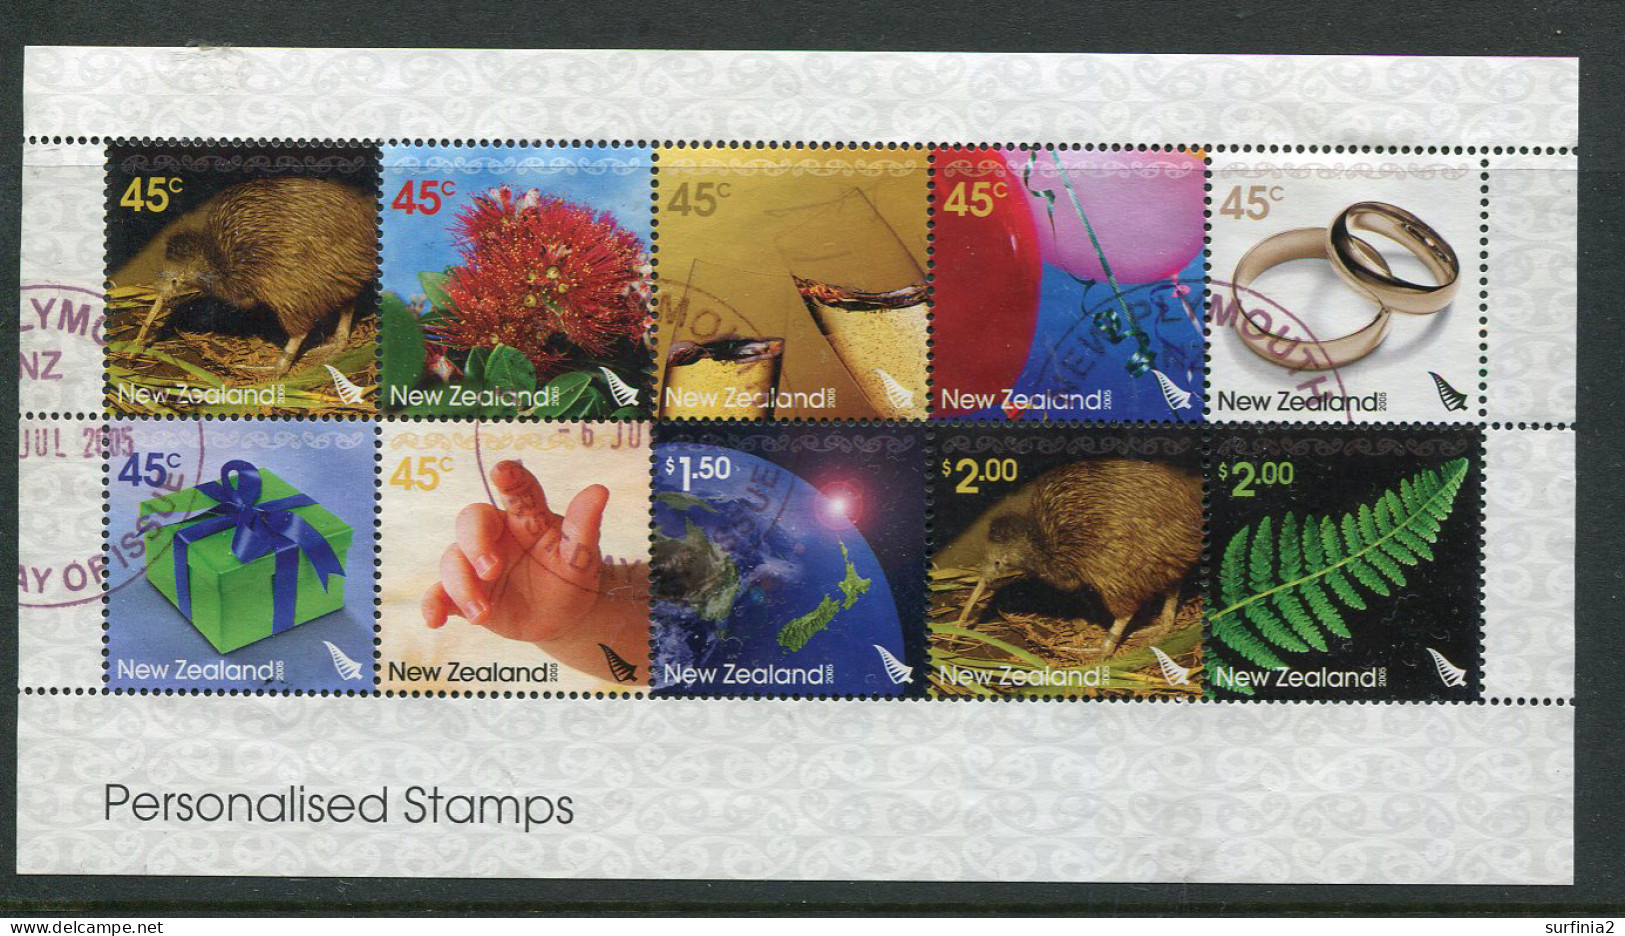 NEW ZEALAND 2005 PERSONALISED STAMPS SHEET 2801-10 FU - Oblitérés